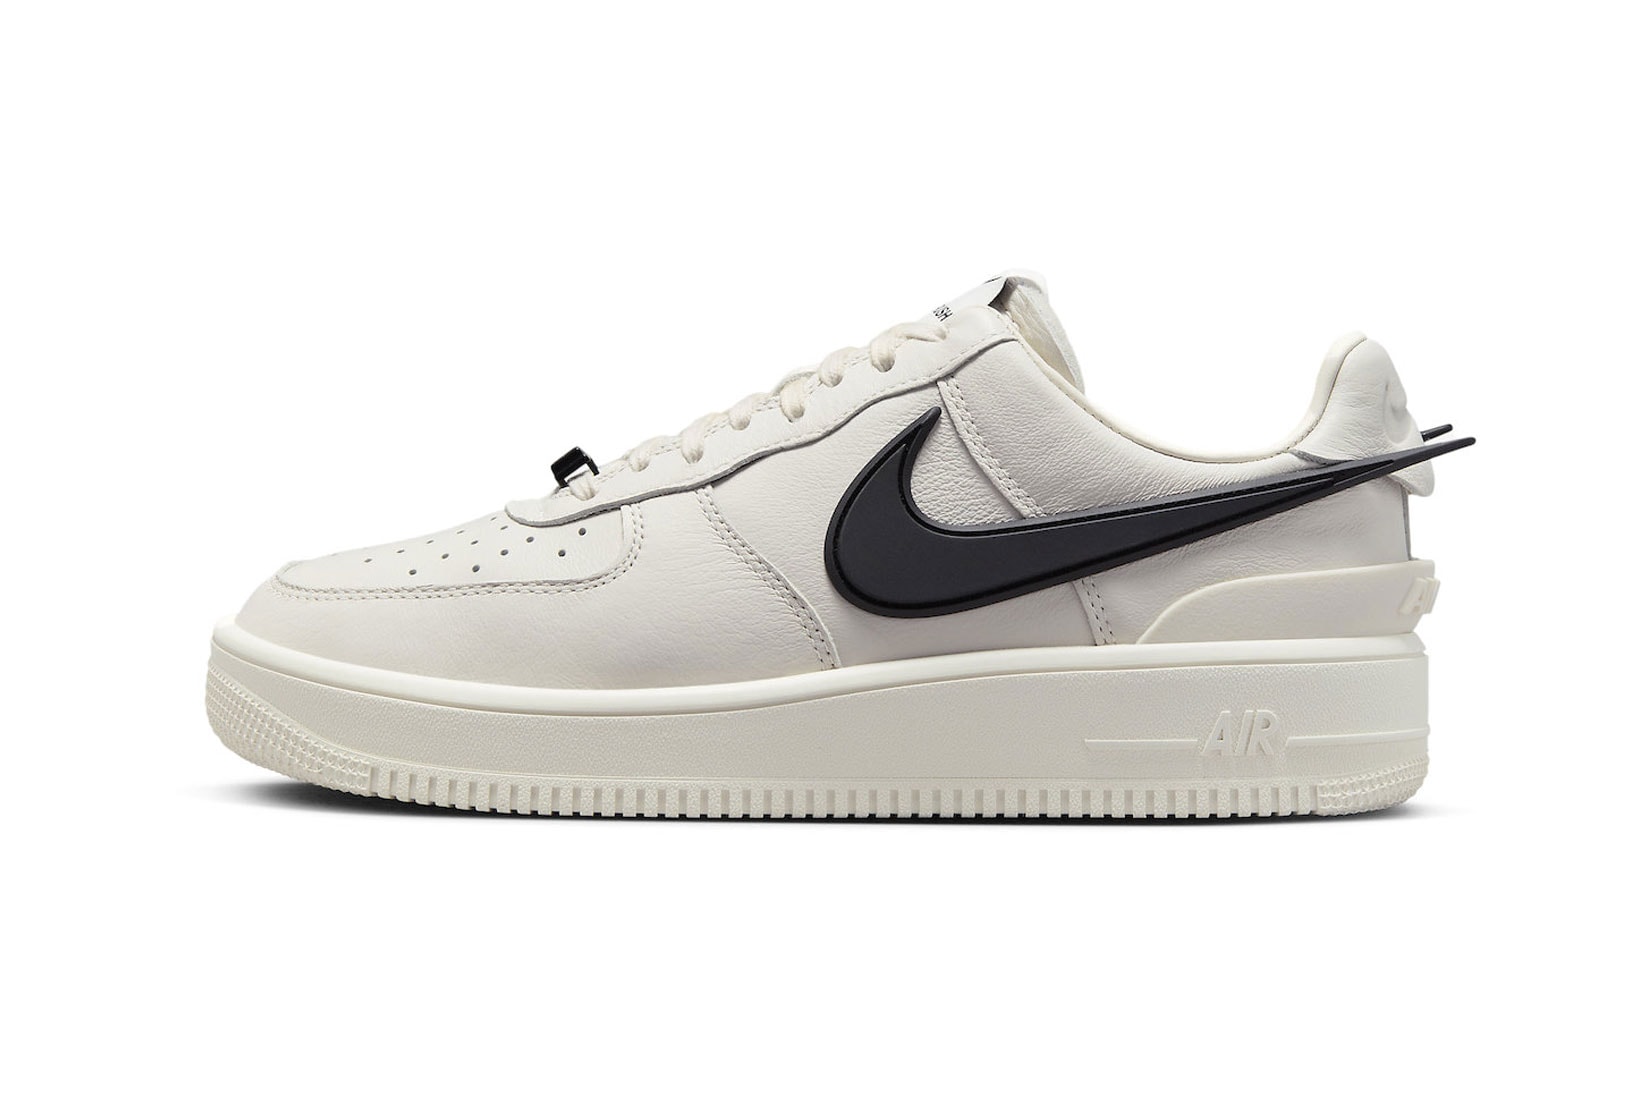 Nike Air Force 1 Low Utility Black White  Sneakers fashion, Nike air  shoes, Hype shoes